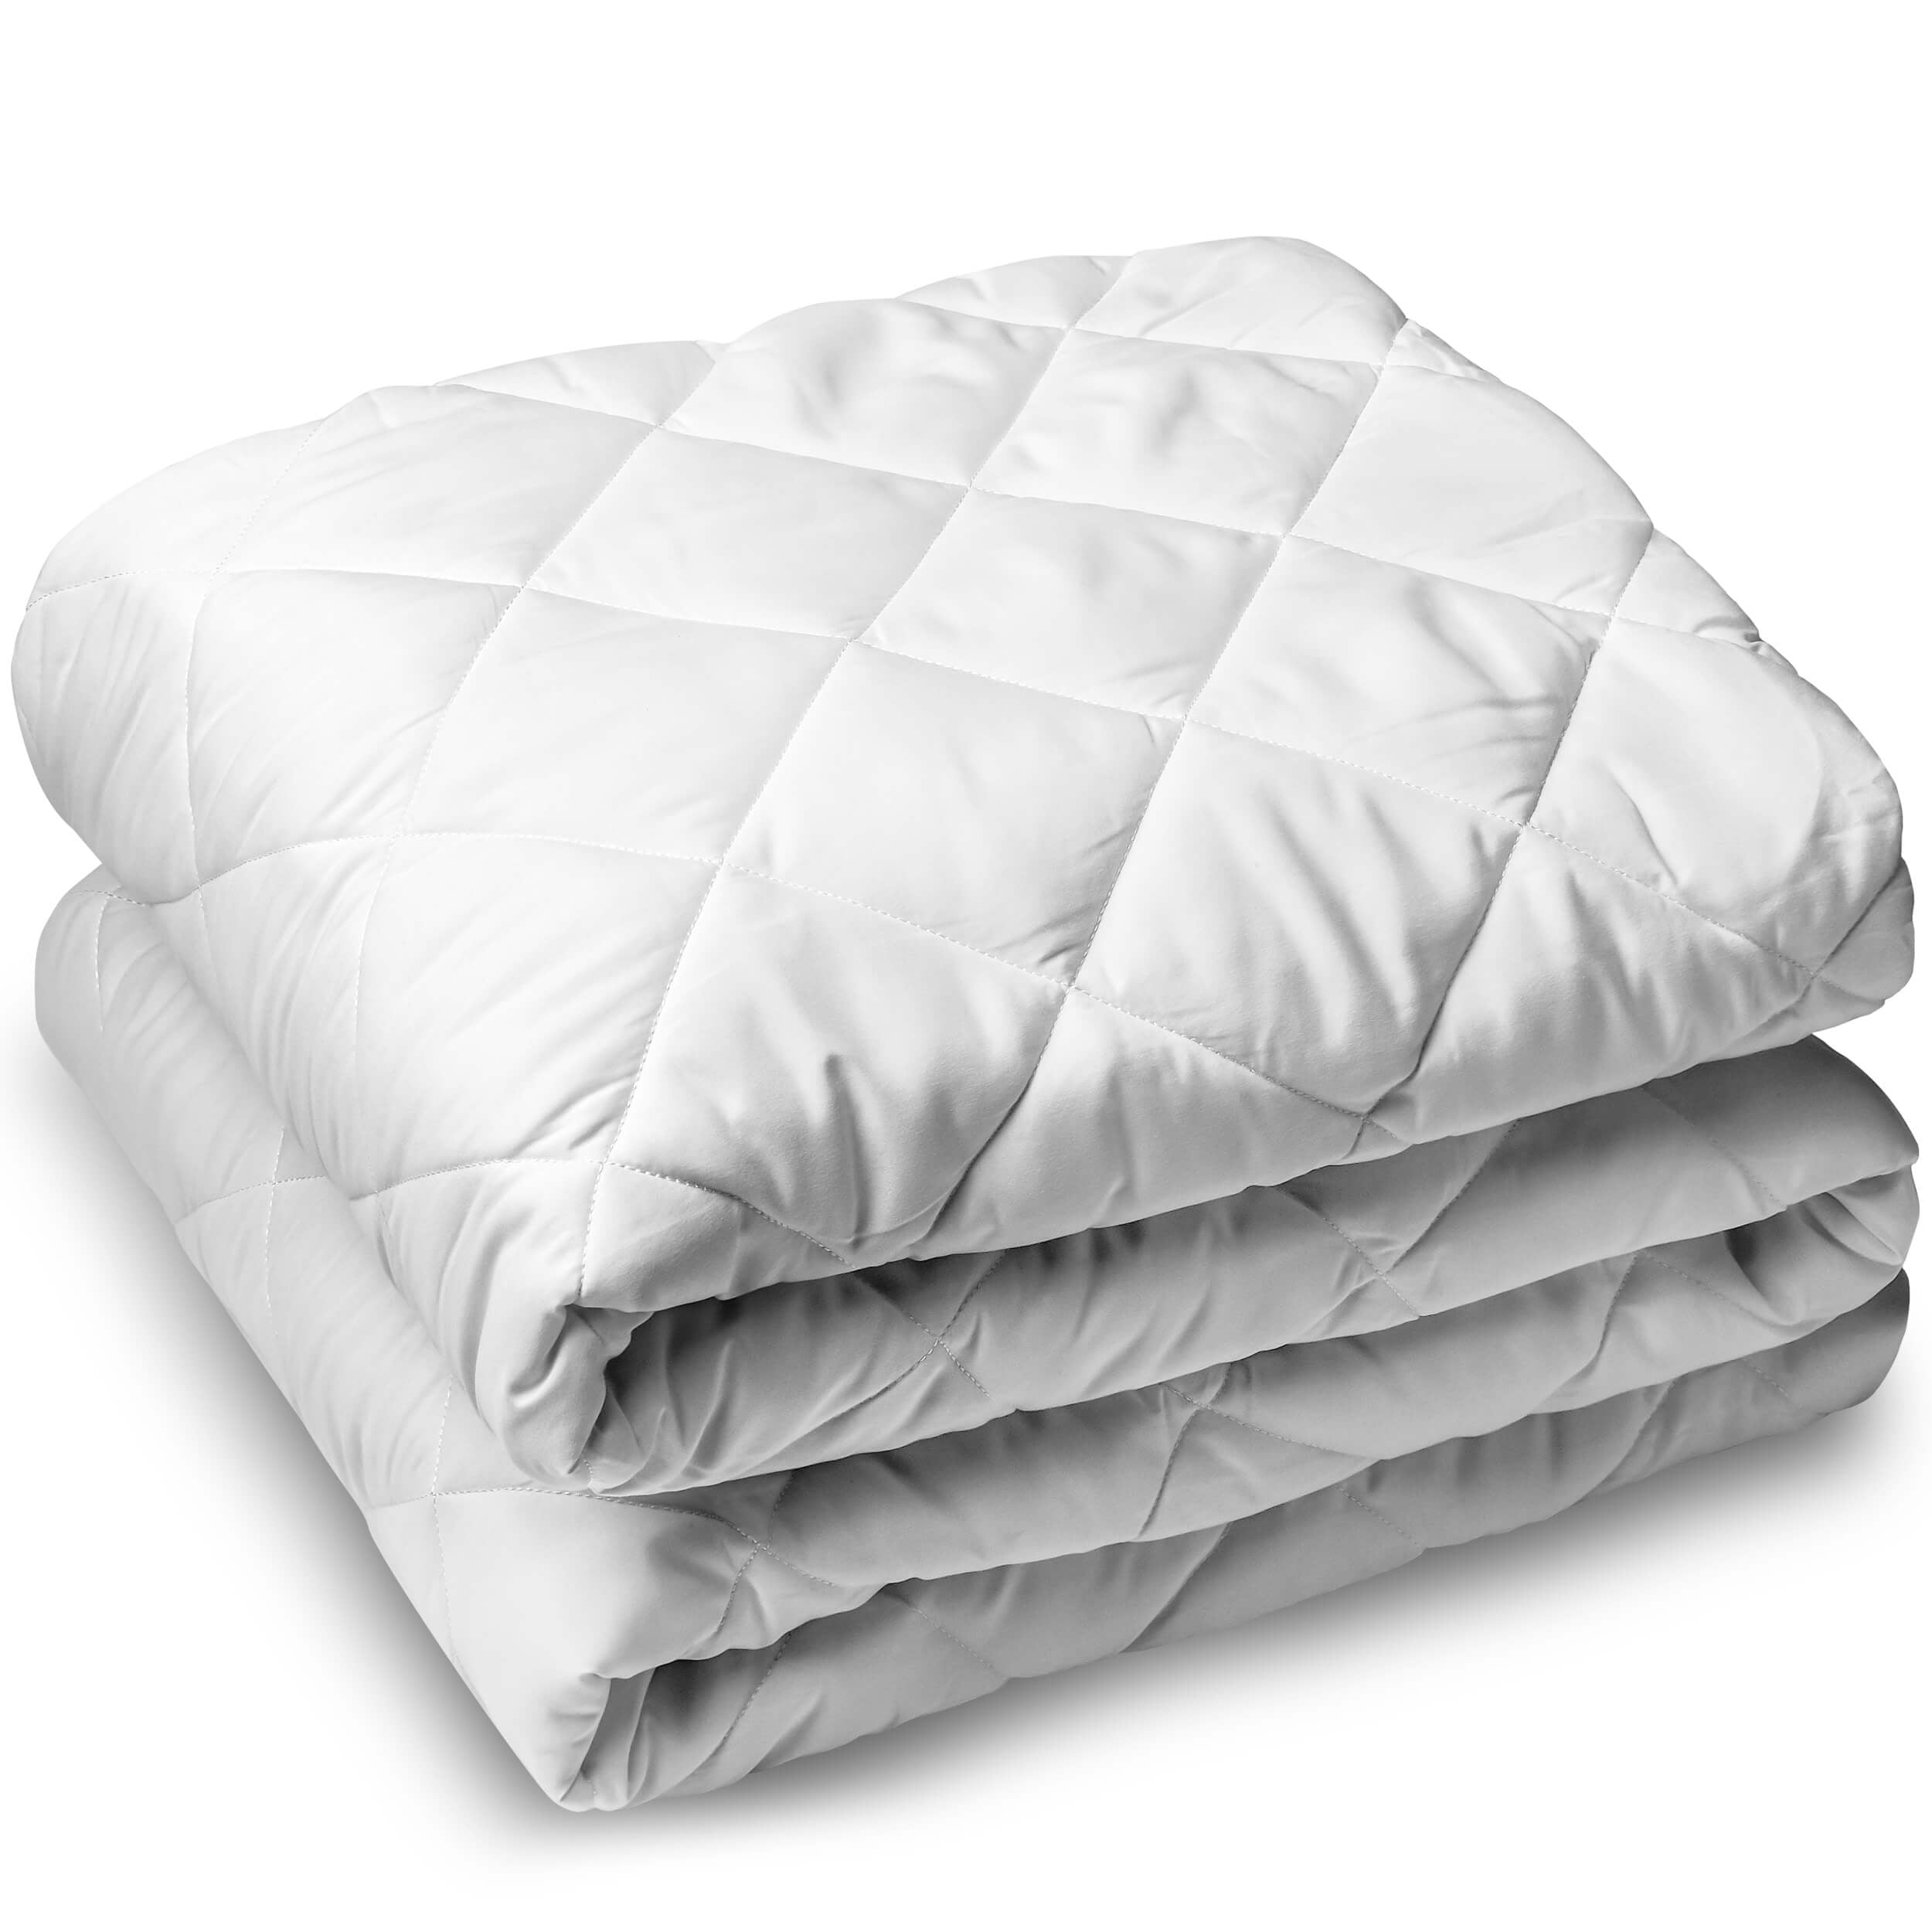 King 200cm MEWAY Quilted Mattress Pad-Hypoallergenic Microfiber Mattress topper protector 150